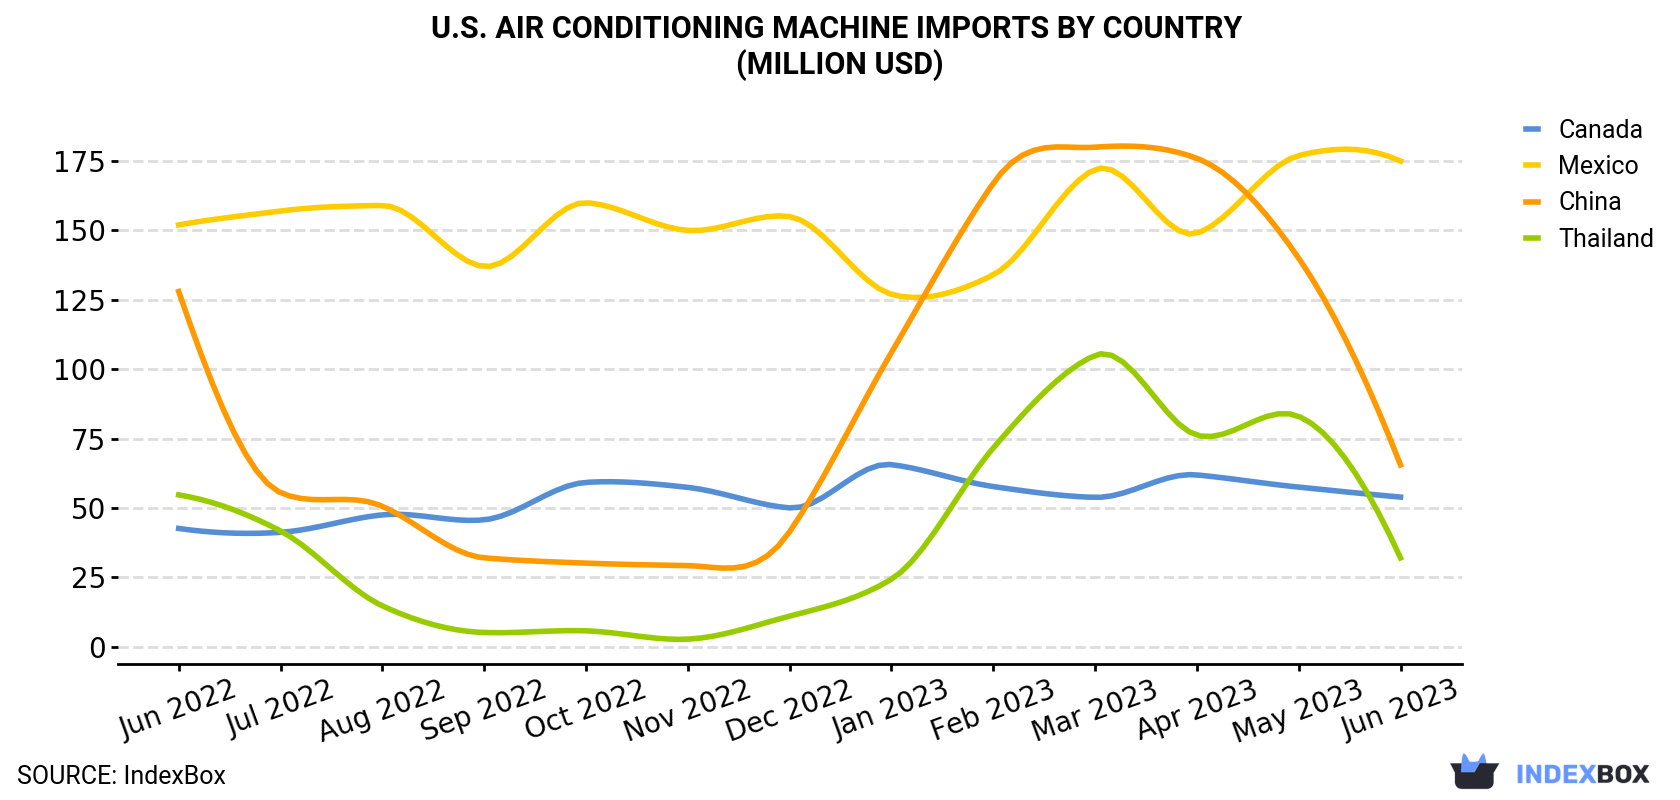 U.S. Air Conditioning Machine Imports By Country (Million USD)